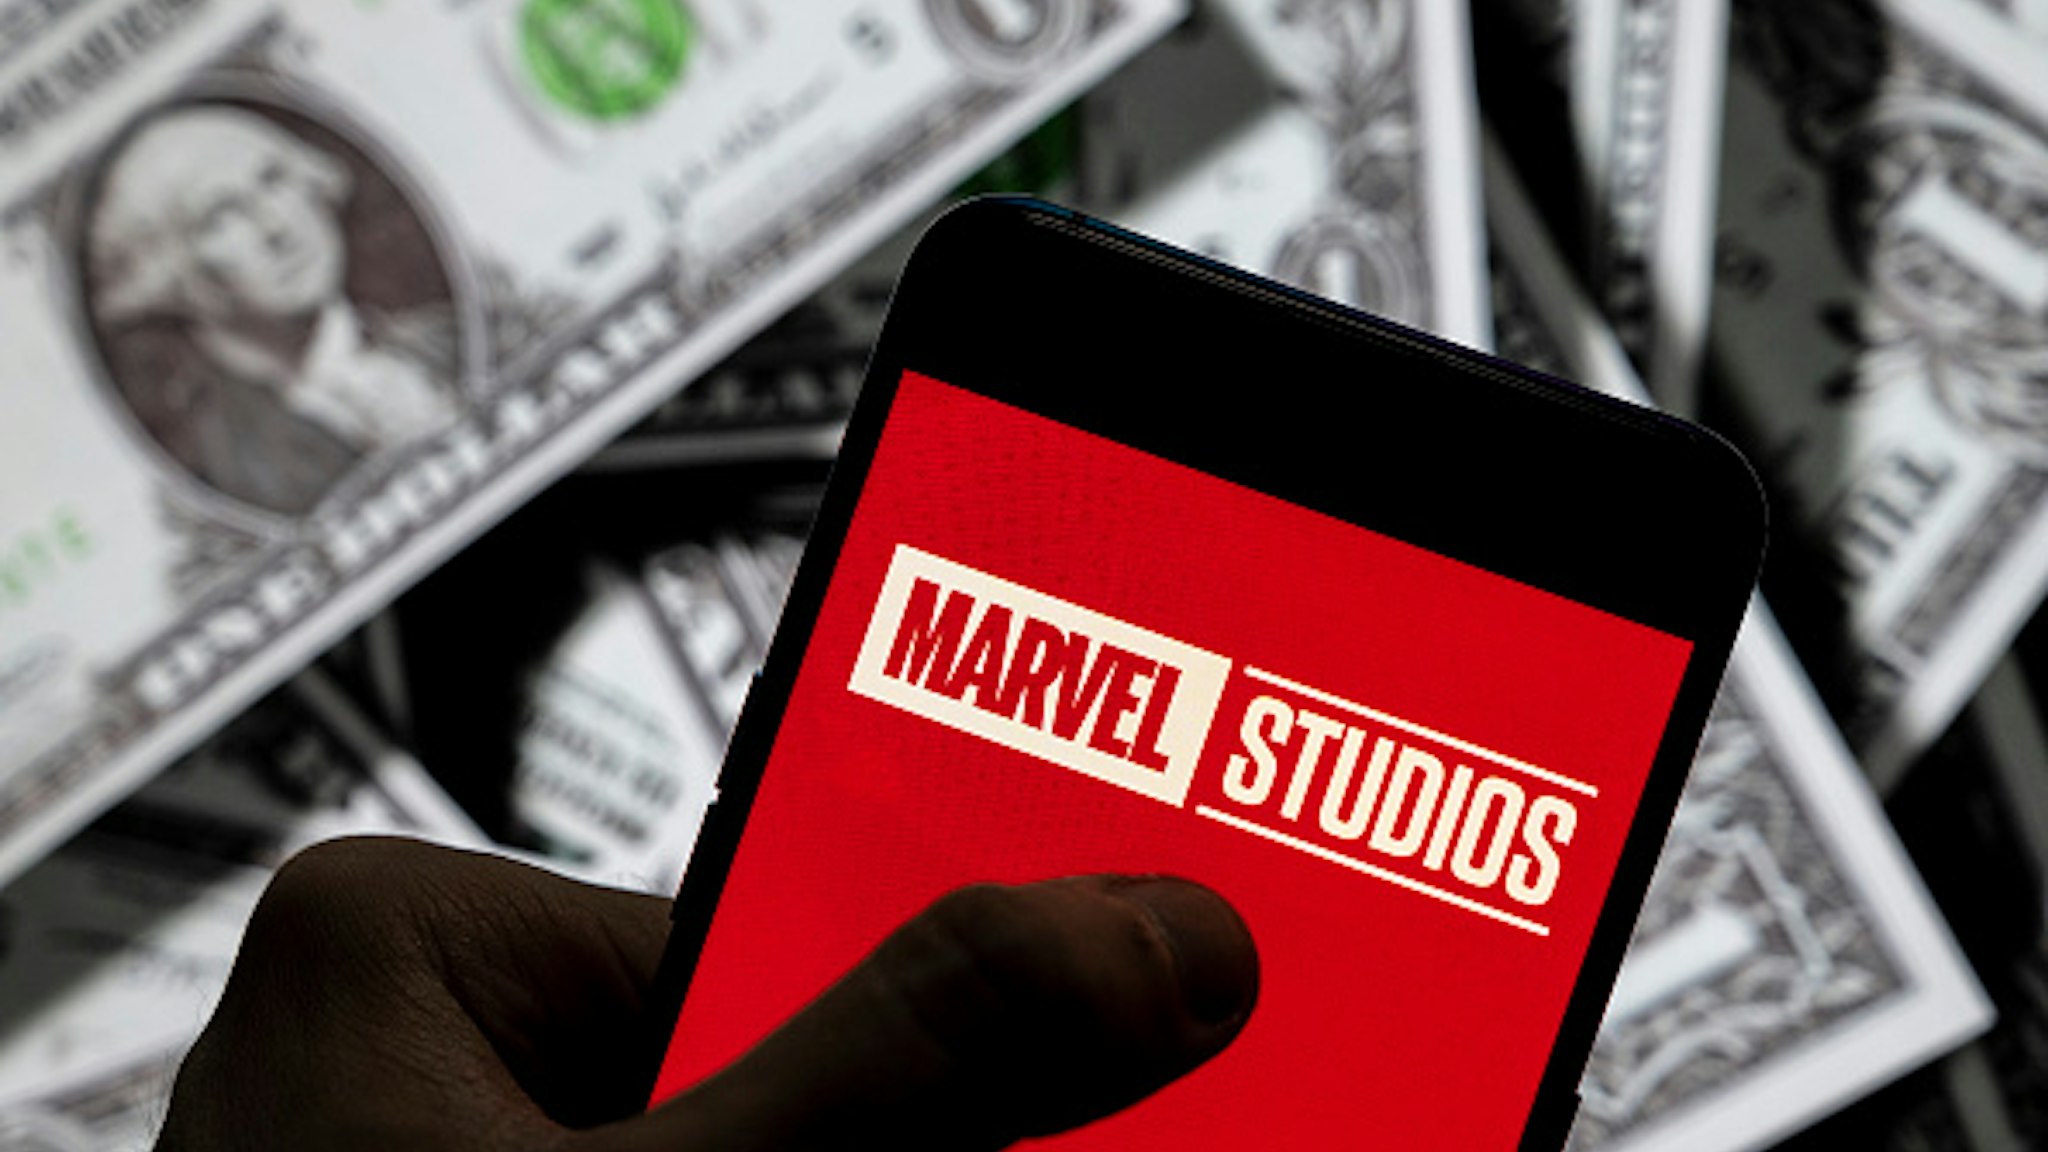 CHINA - 2021/04/23: In this photo illustration, a Marvel Studios logo seen displayed on a smartphone with USD (United States dollar) currency in the background.